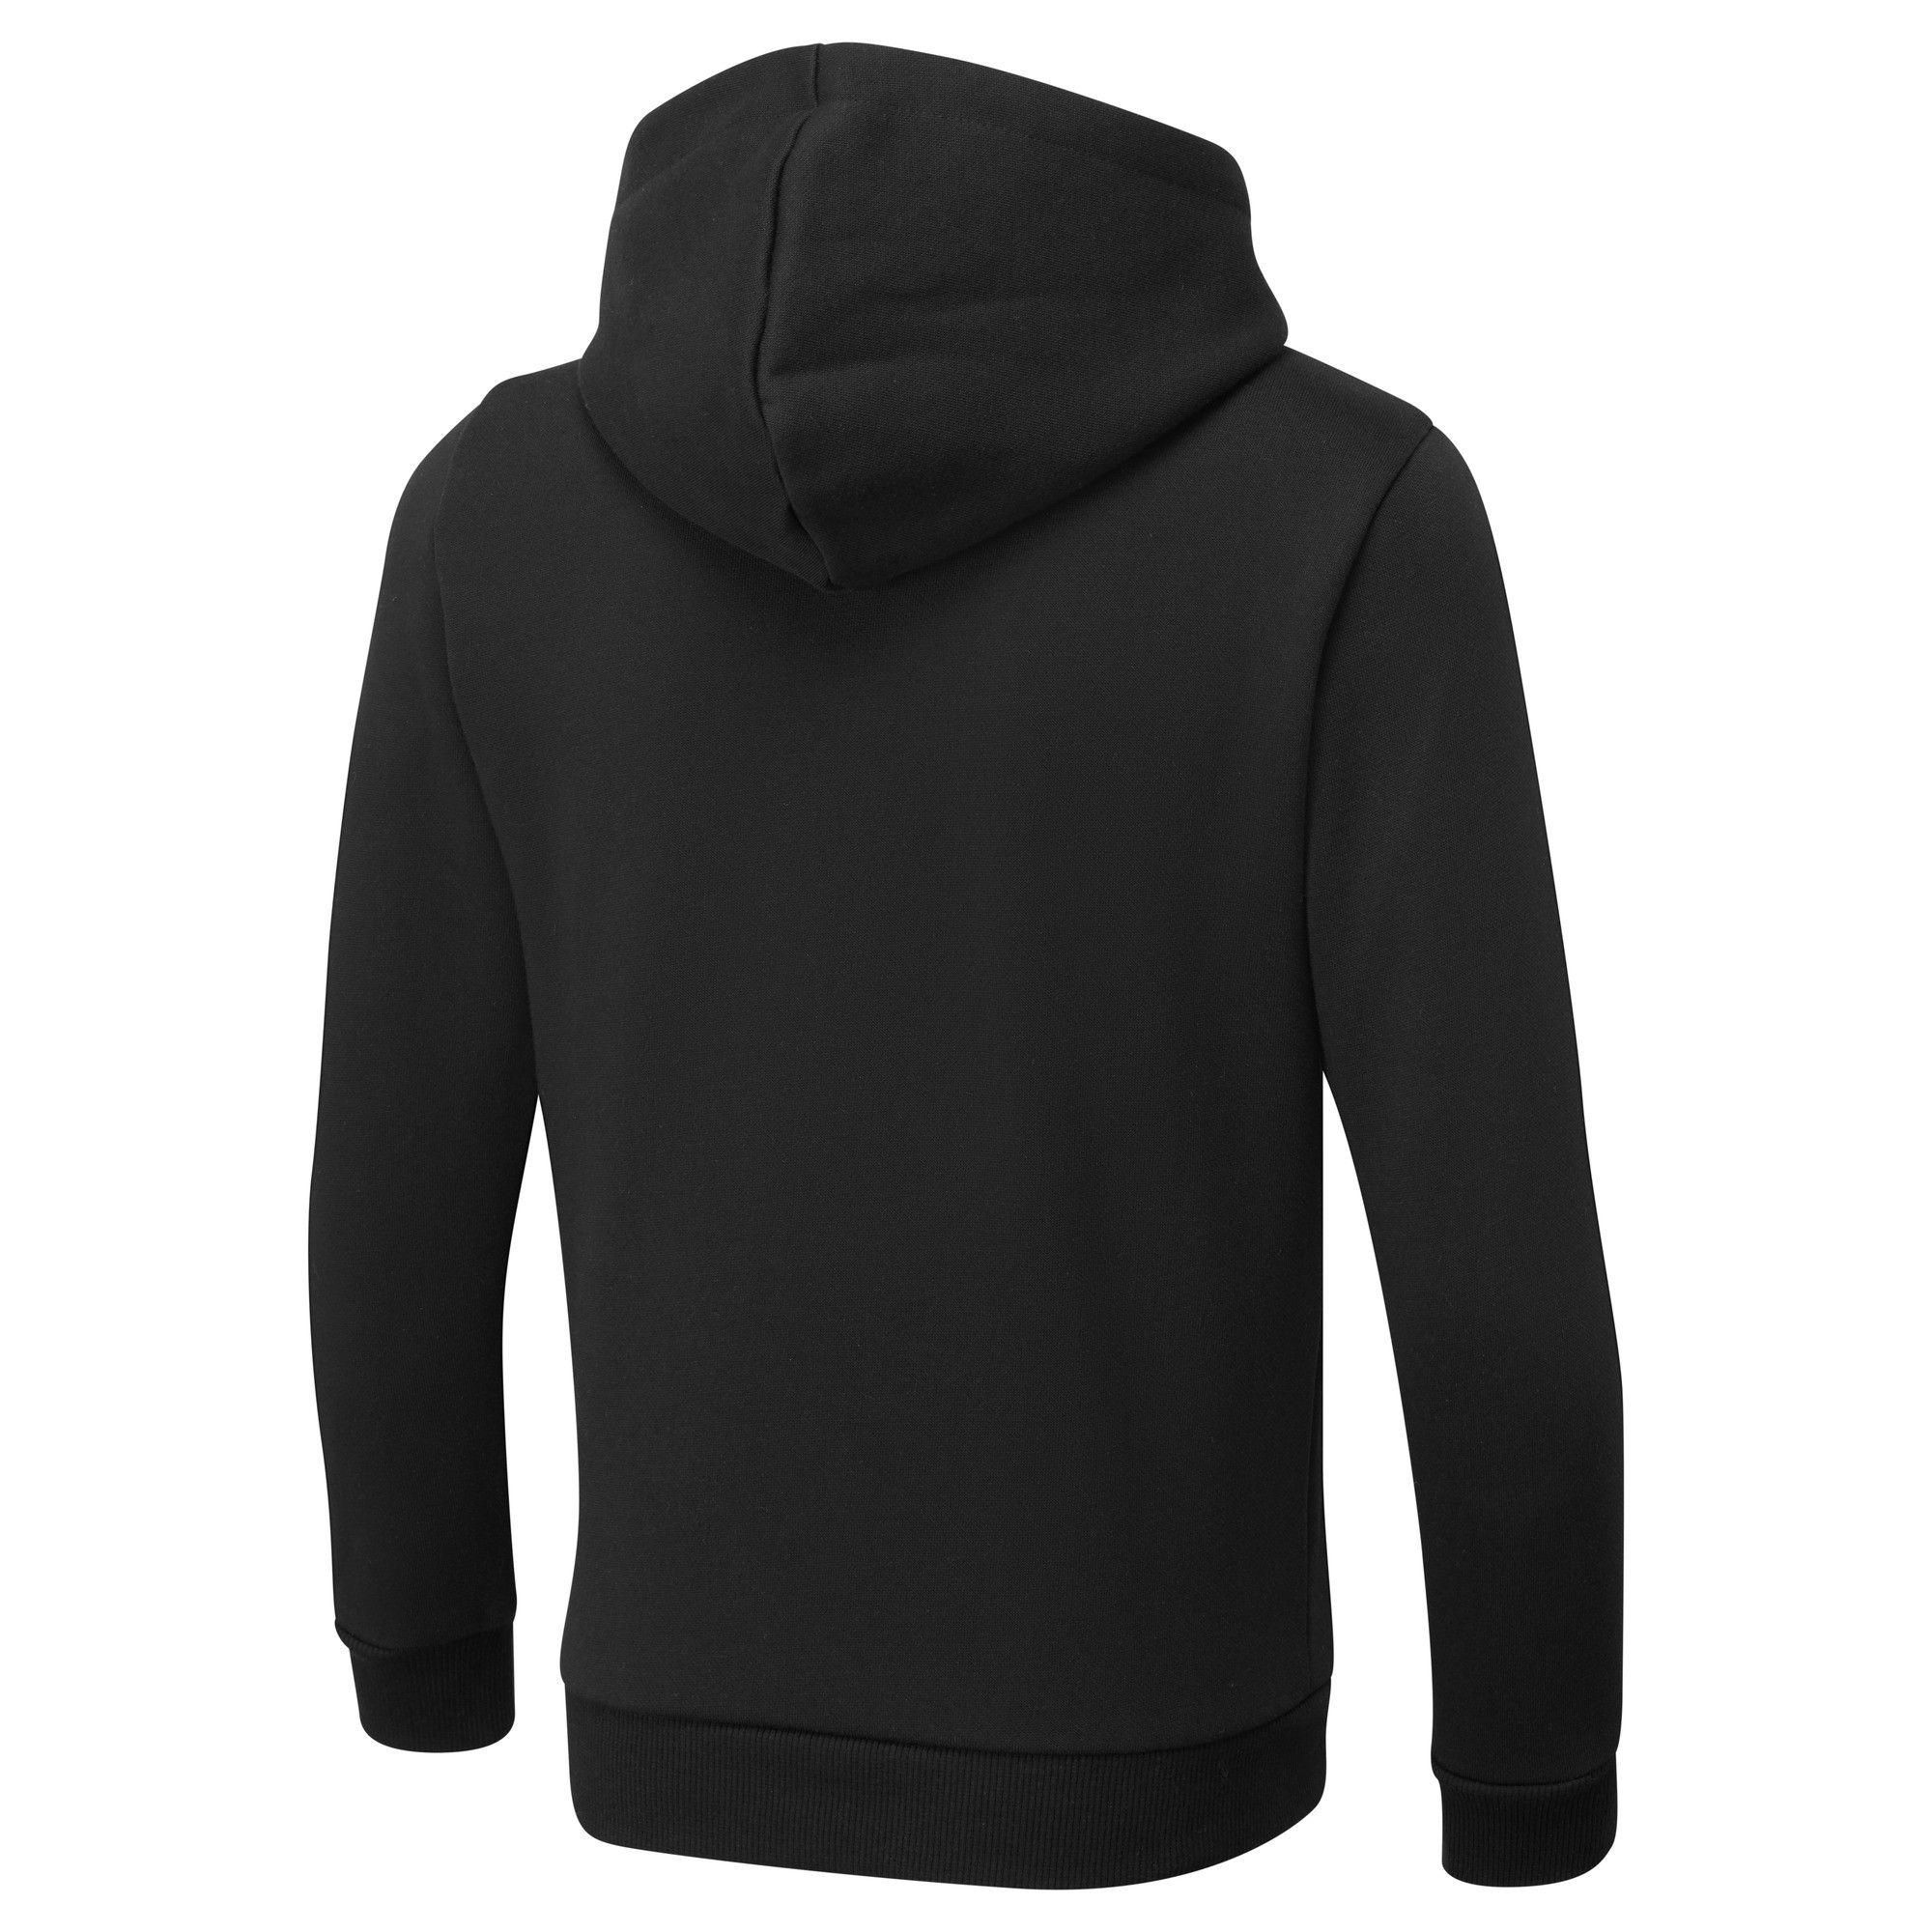  An undisputed essential for any young streetwear fan, this long-sleeve hoodie is a true classic. Made from cosy cotton and low-impact recycled materials. FEATURES & BENEFITS Contains Recycled Material: Made with recycled fibers. One of PUMA's answers to reduce our environmental impact. DETAILS Hooded necklineLong sleeves